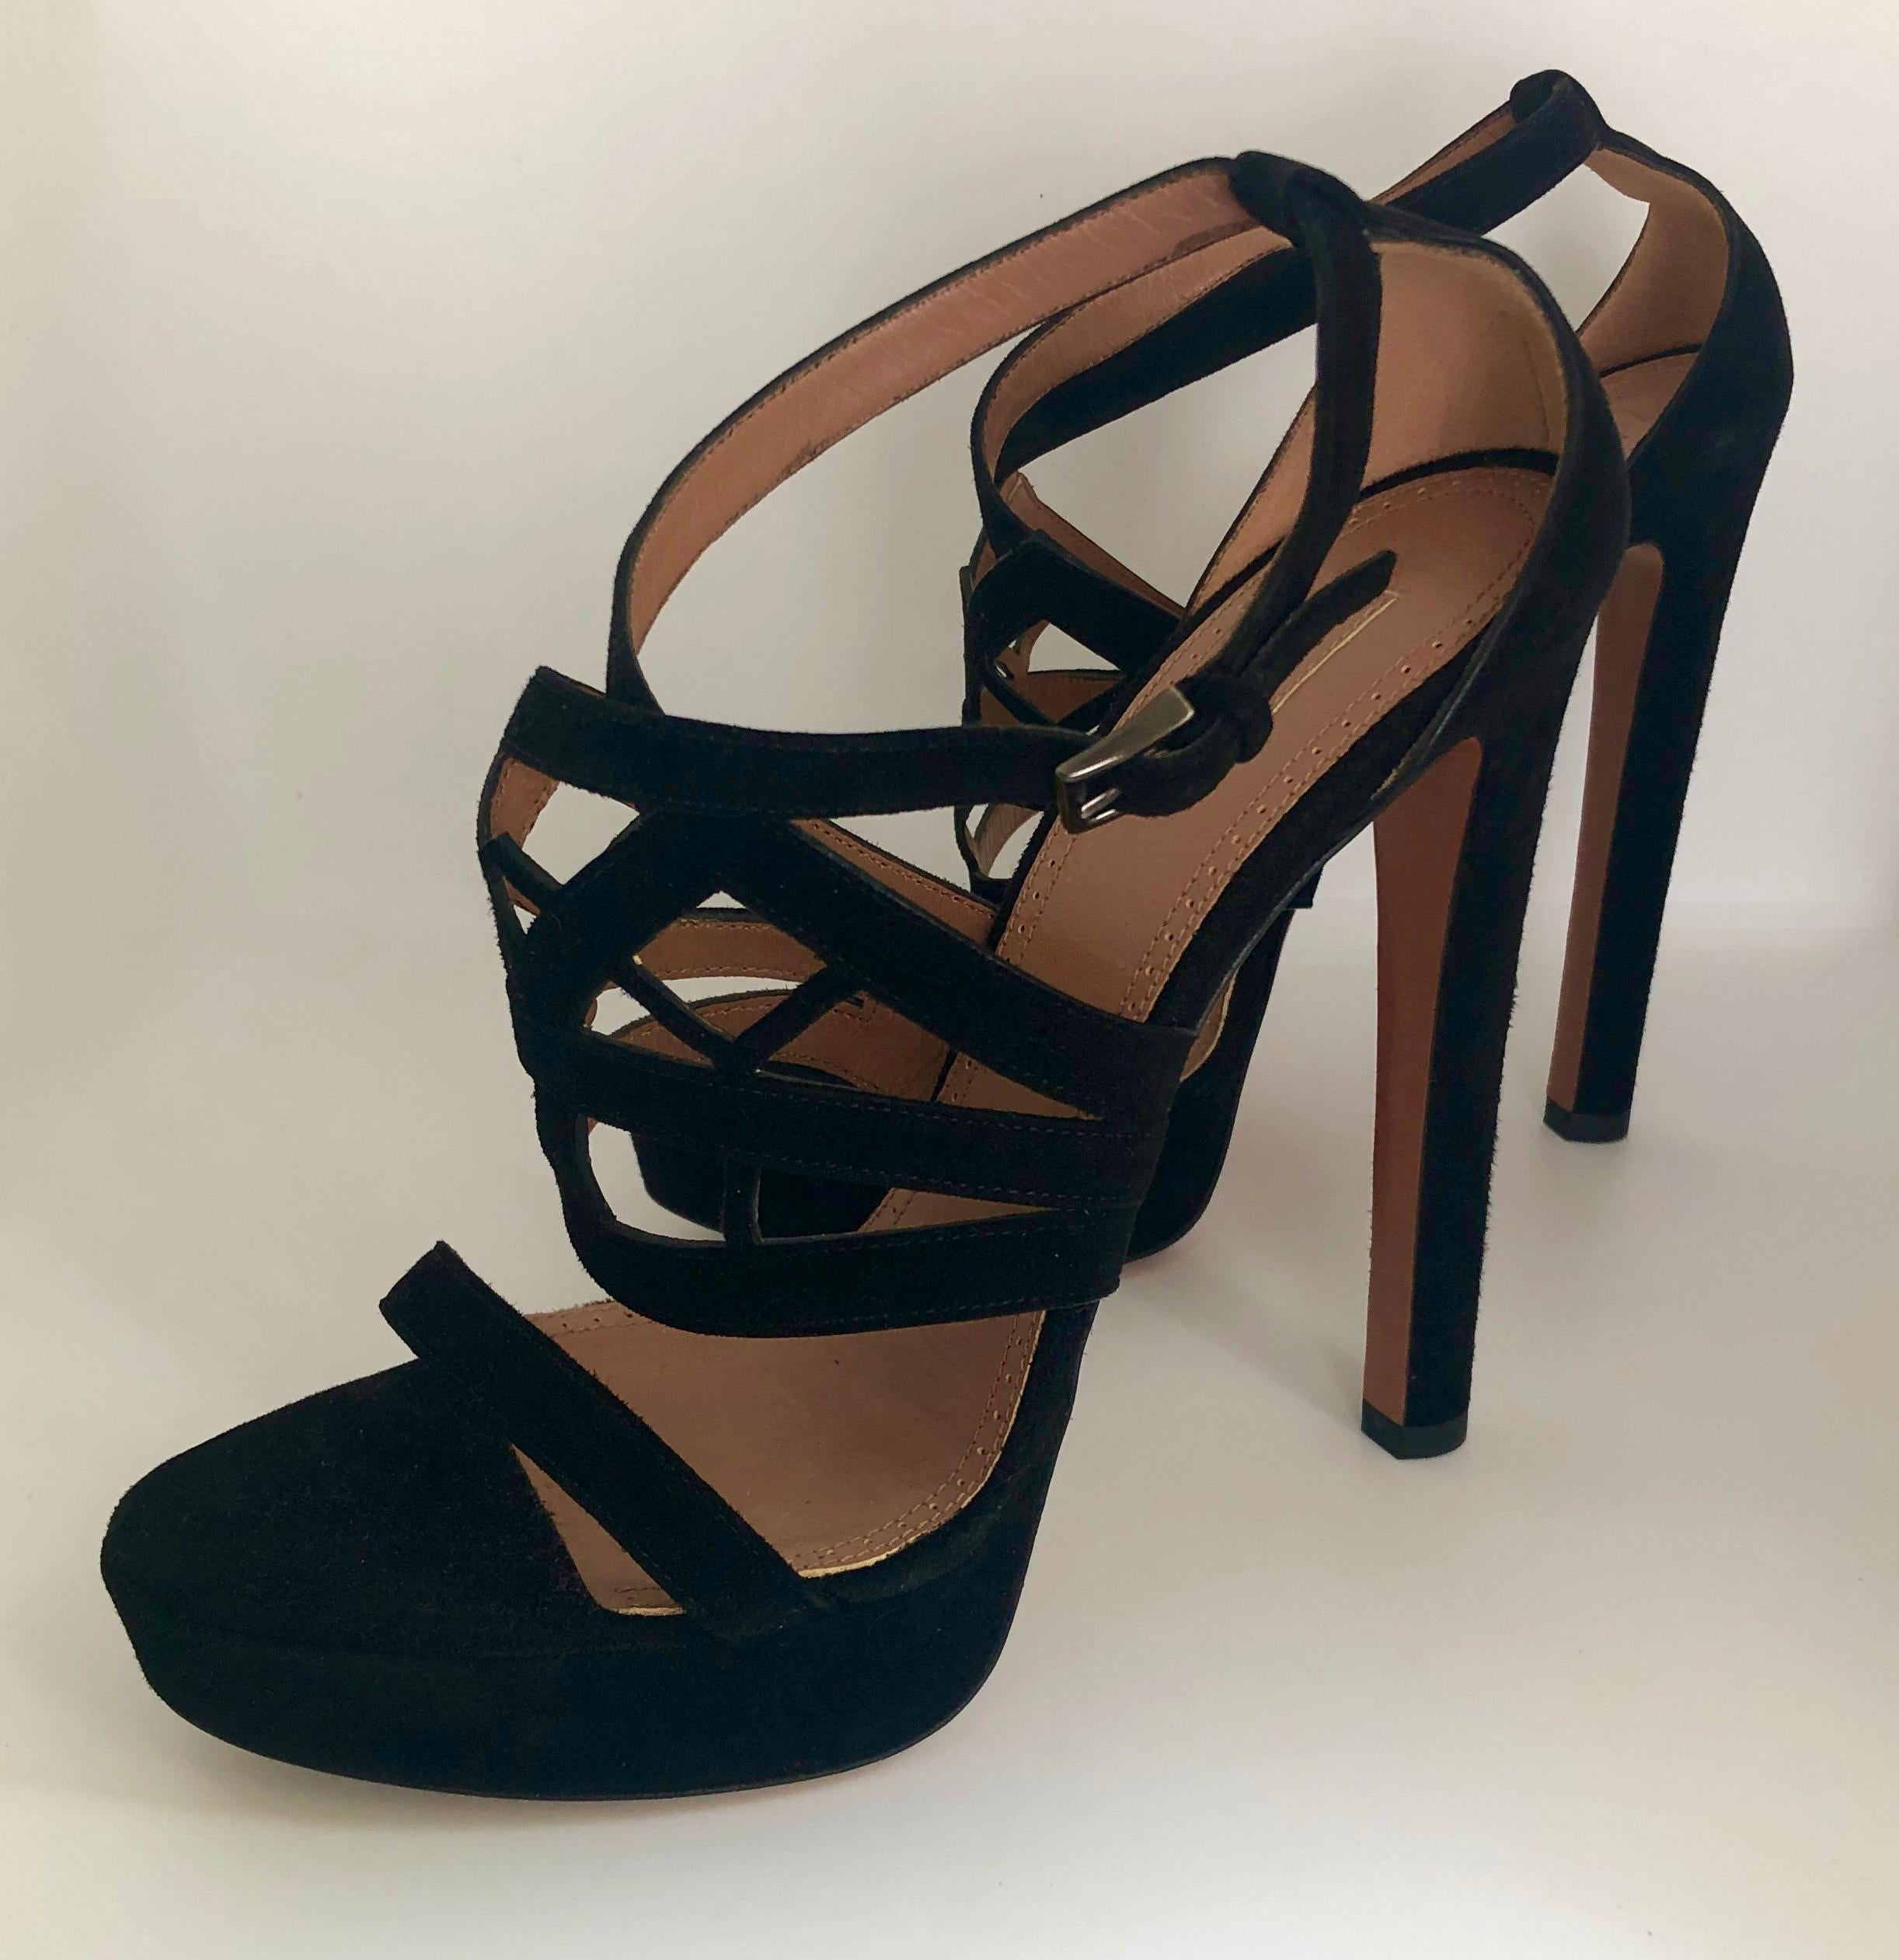 Offered is a pair of Azzedine Alaia, size 39,  black laser cut lattice design strap suede leather with sky high stiletto heel platform sandals. 

Make:  Azzedine Alaia
Size:  39 EU; 2